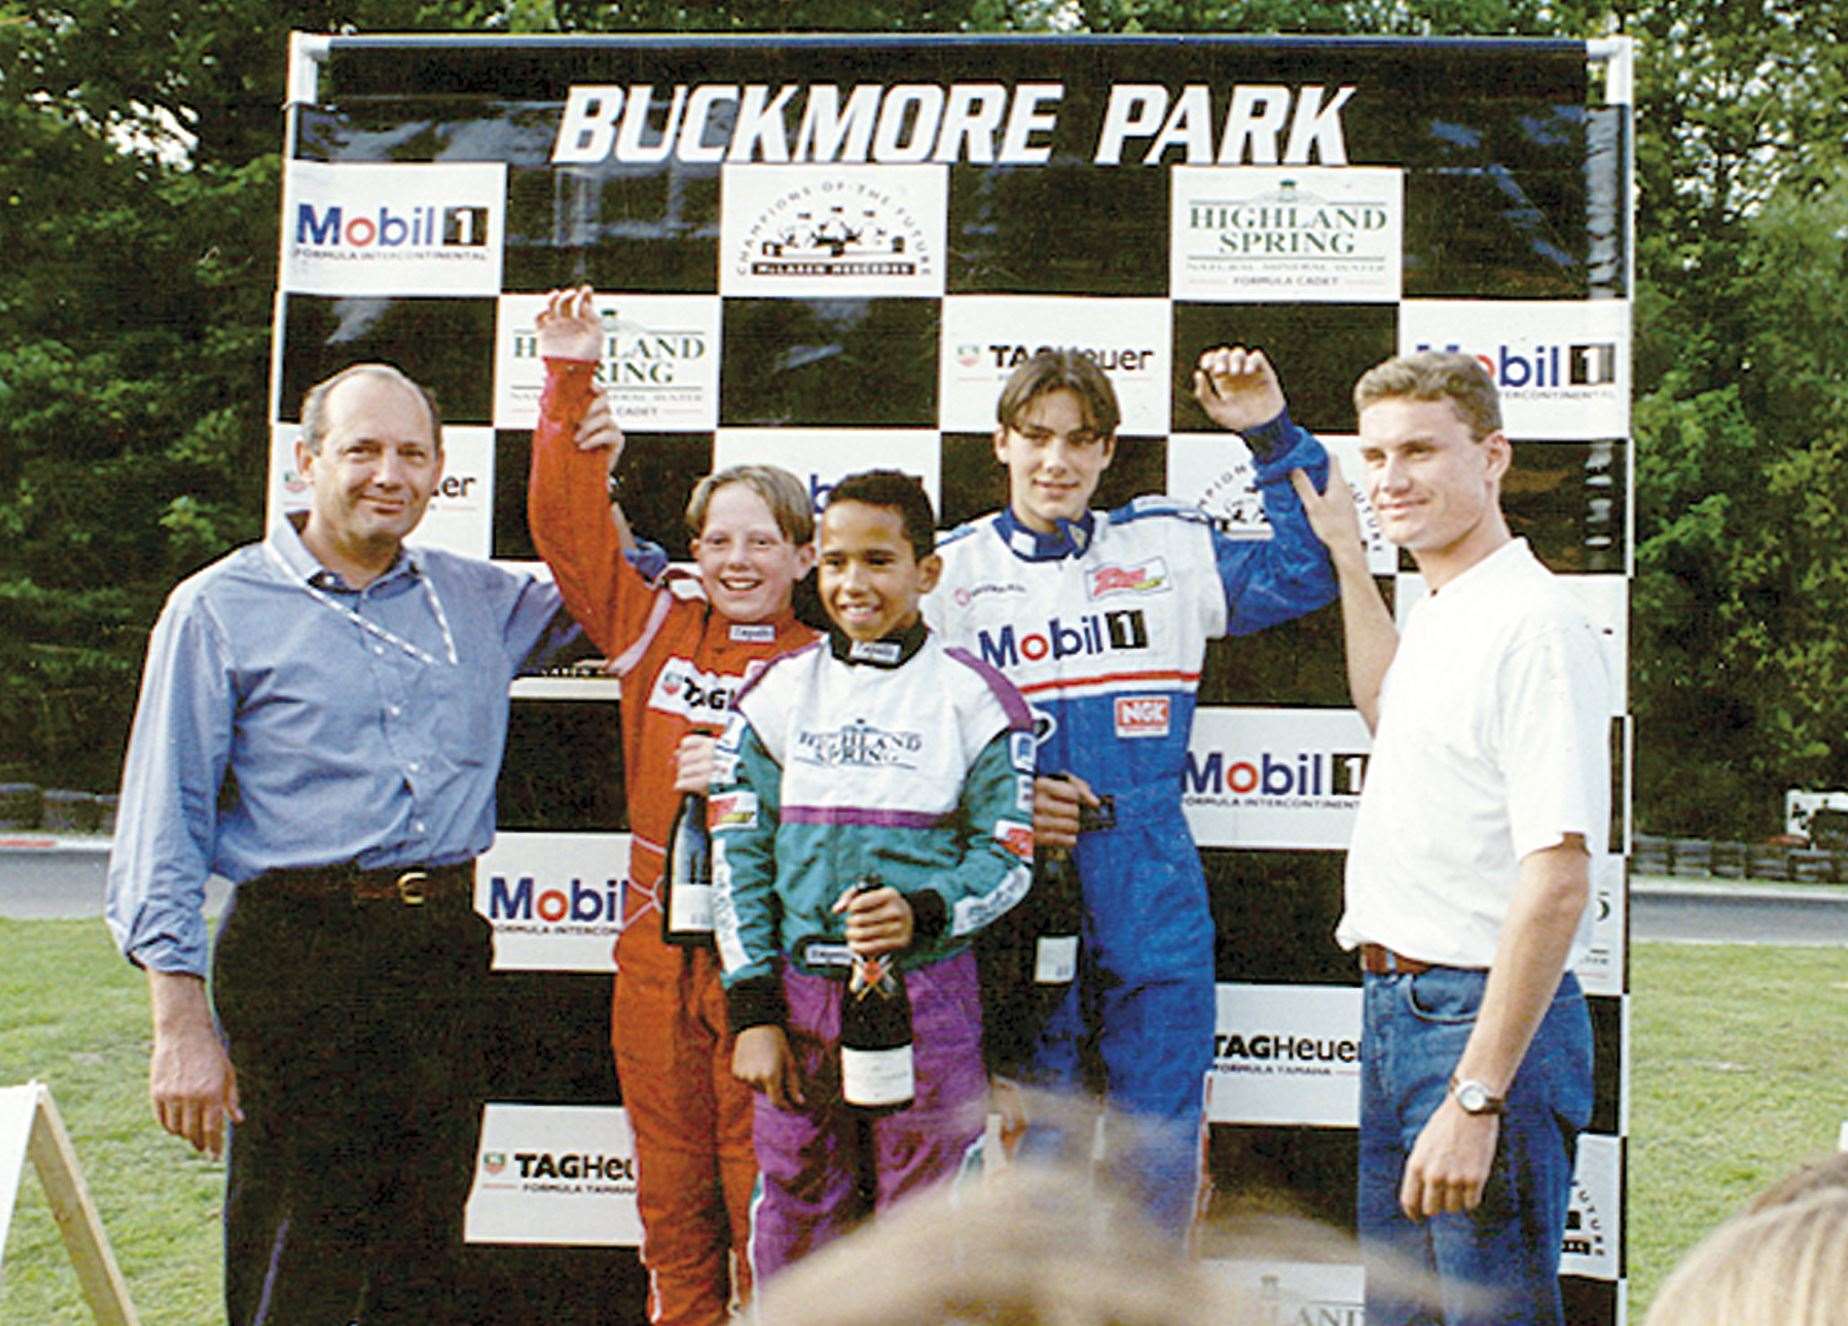 Lewis Hamilton with former McLaren boss Ron Dennis and 13-time Grand Prix winner David Coulthard at Buckmore in 1996